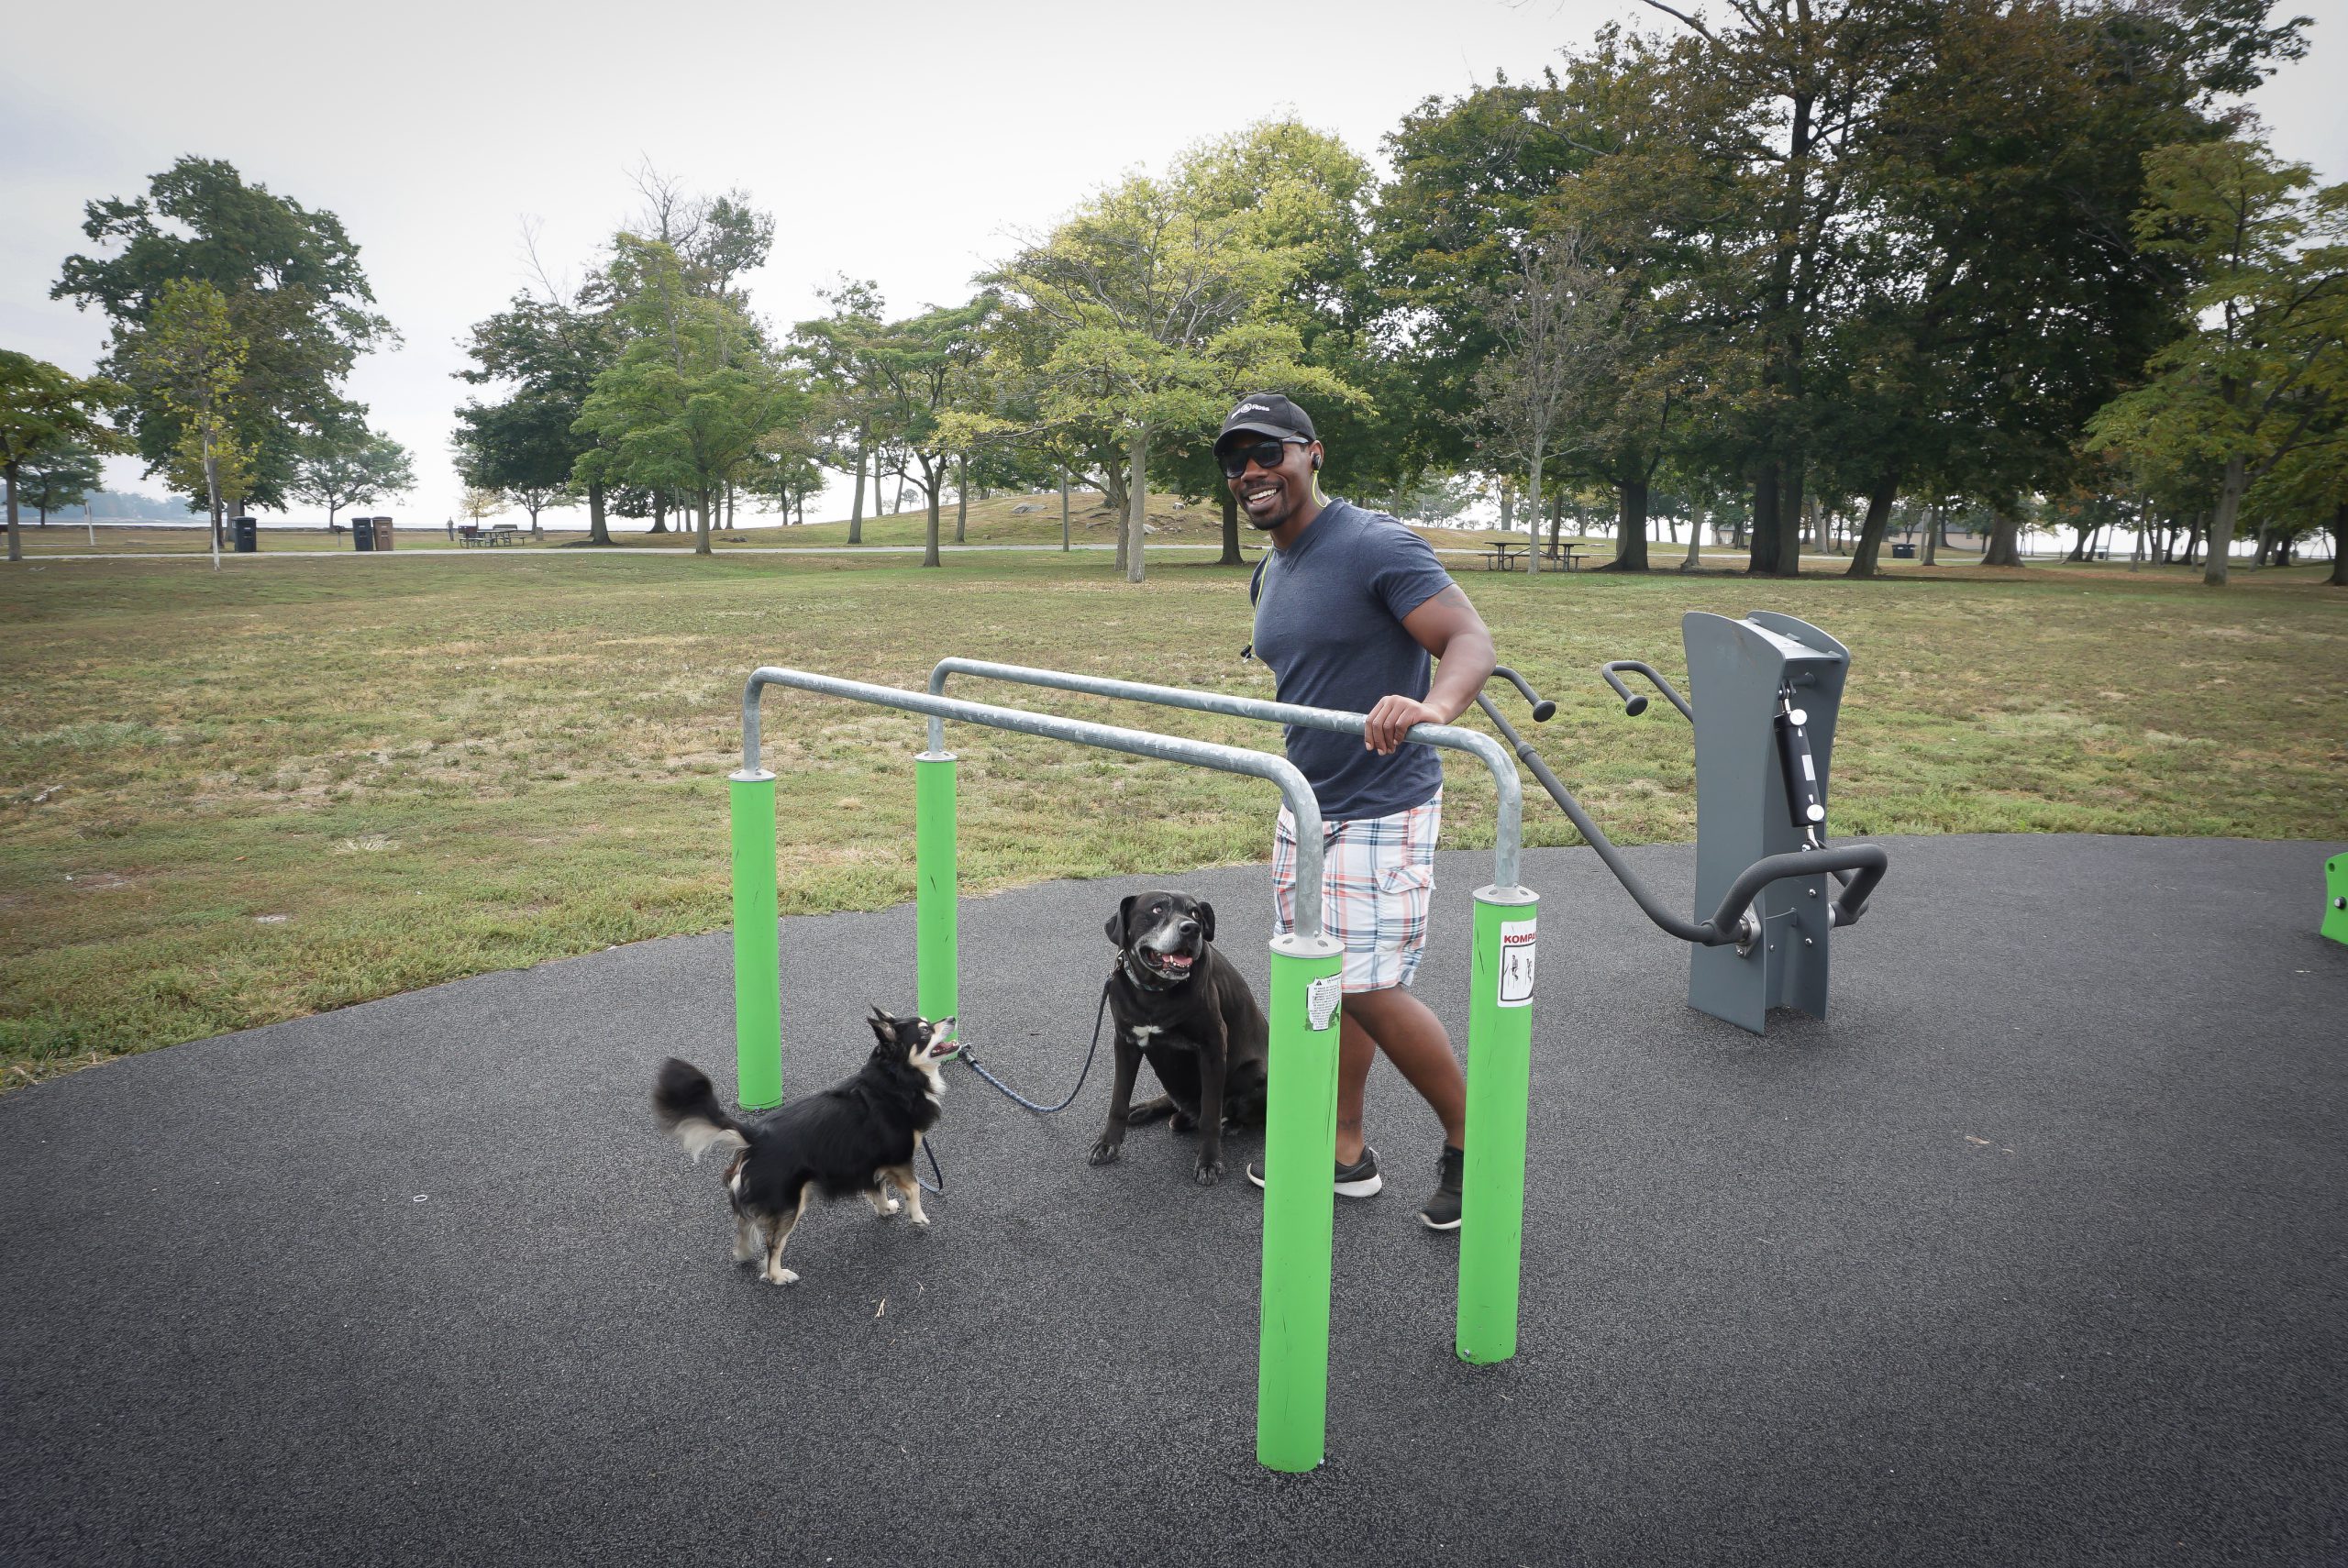 A man and two dogs at an outdoor exercise area